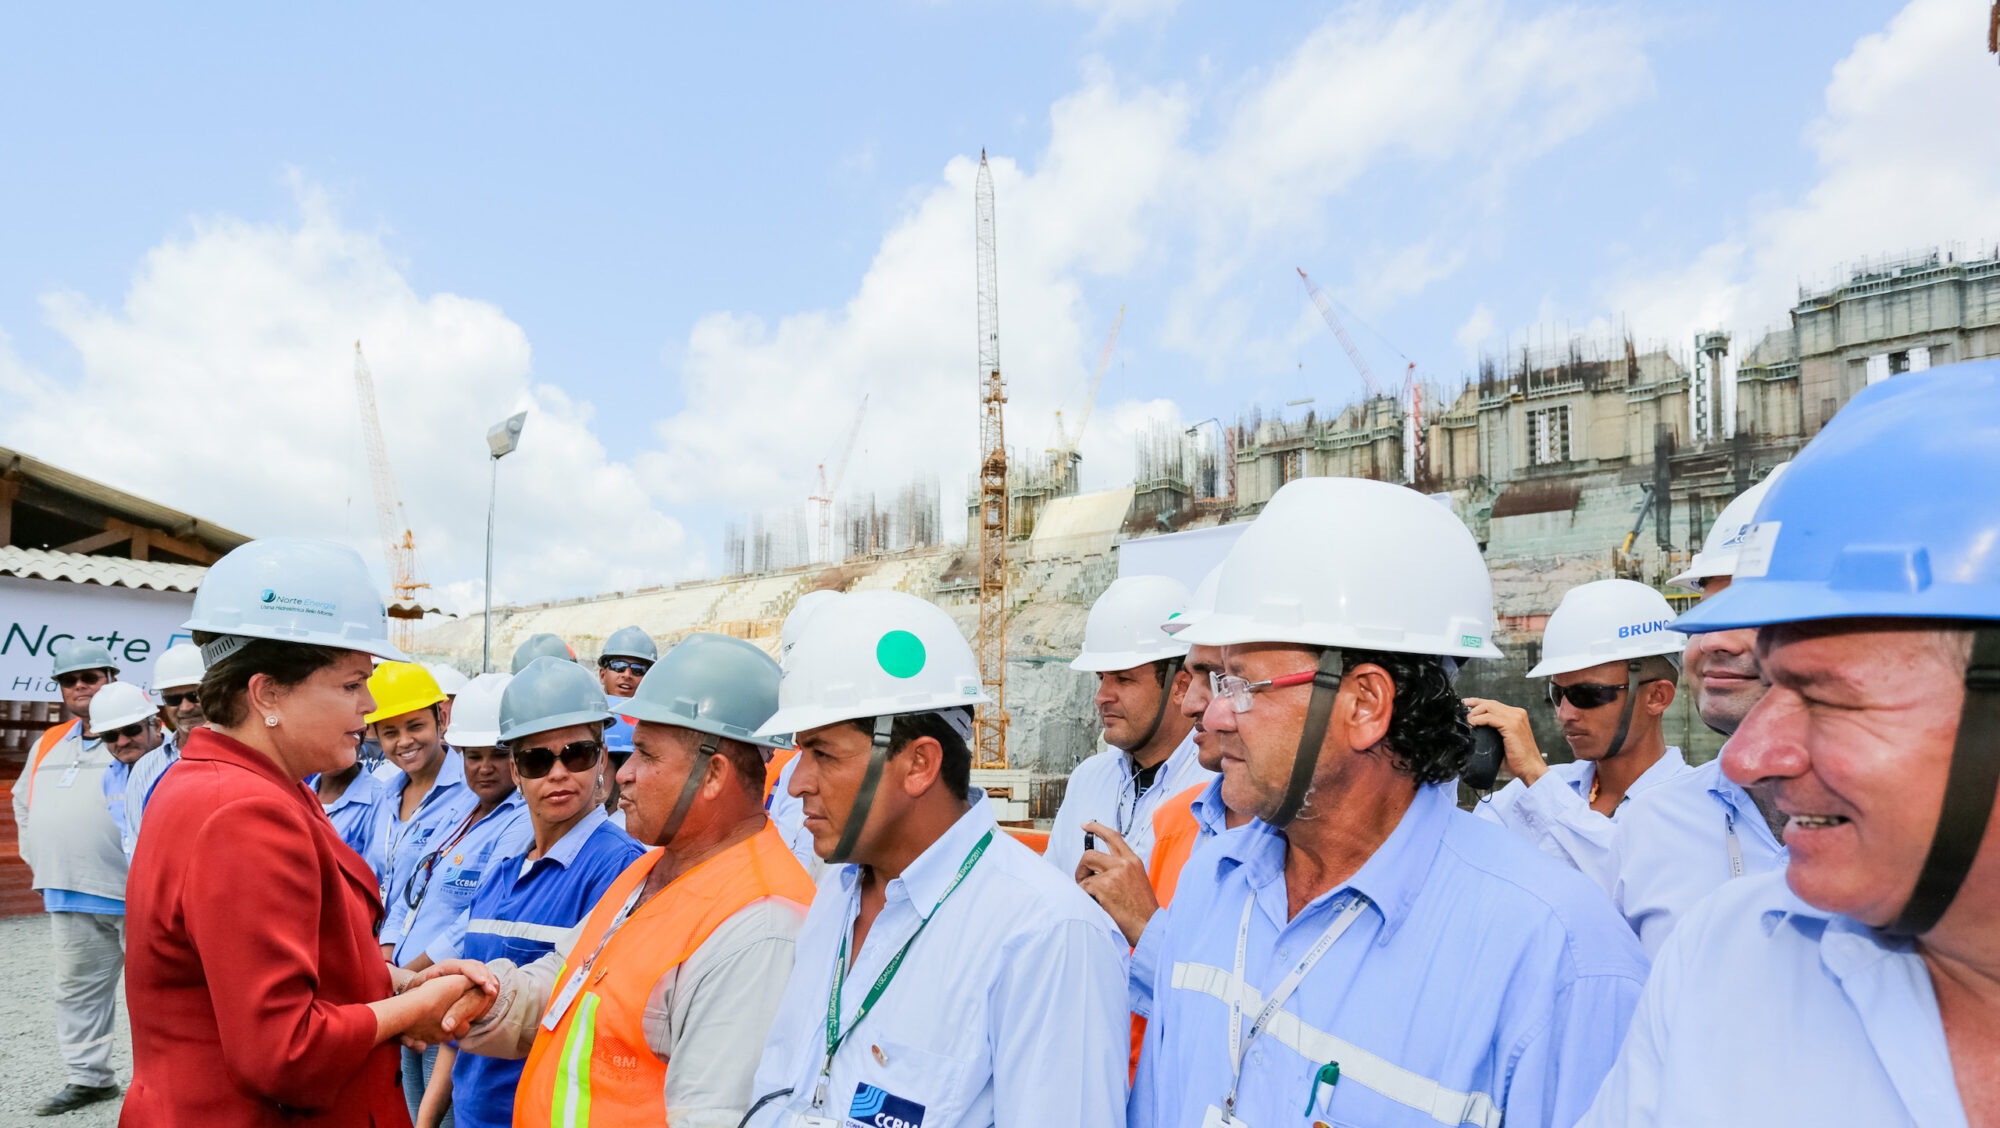 Former president Dilma Rousseff visited the Belo Monte hydropower plant in 2014